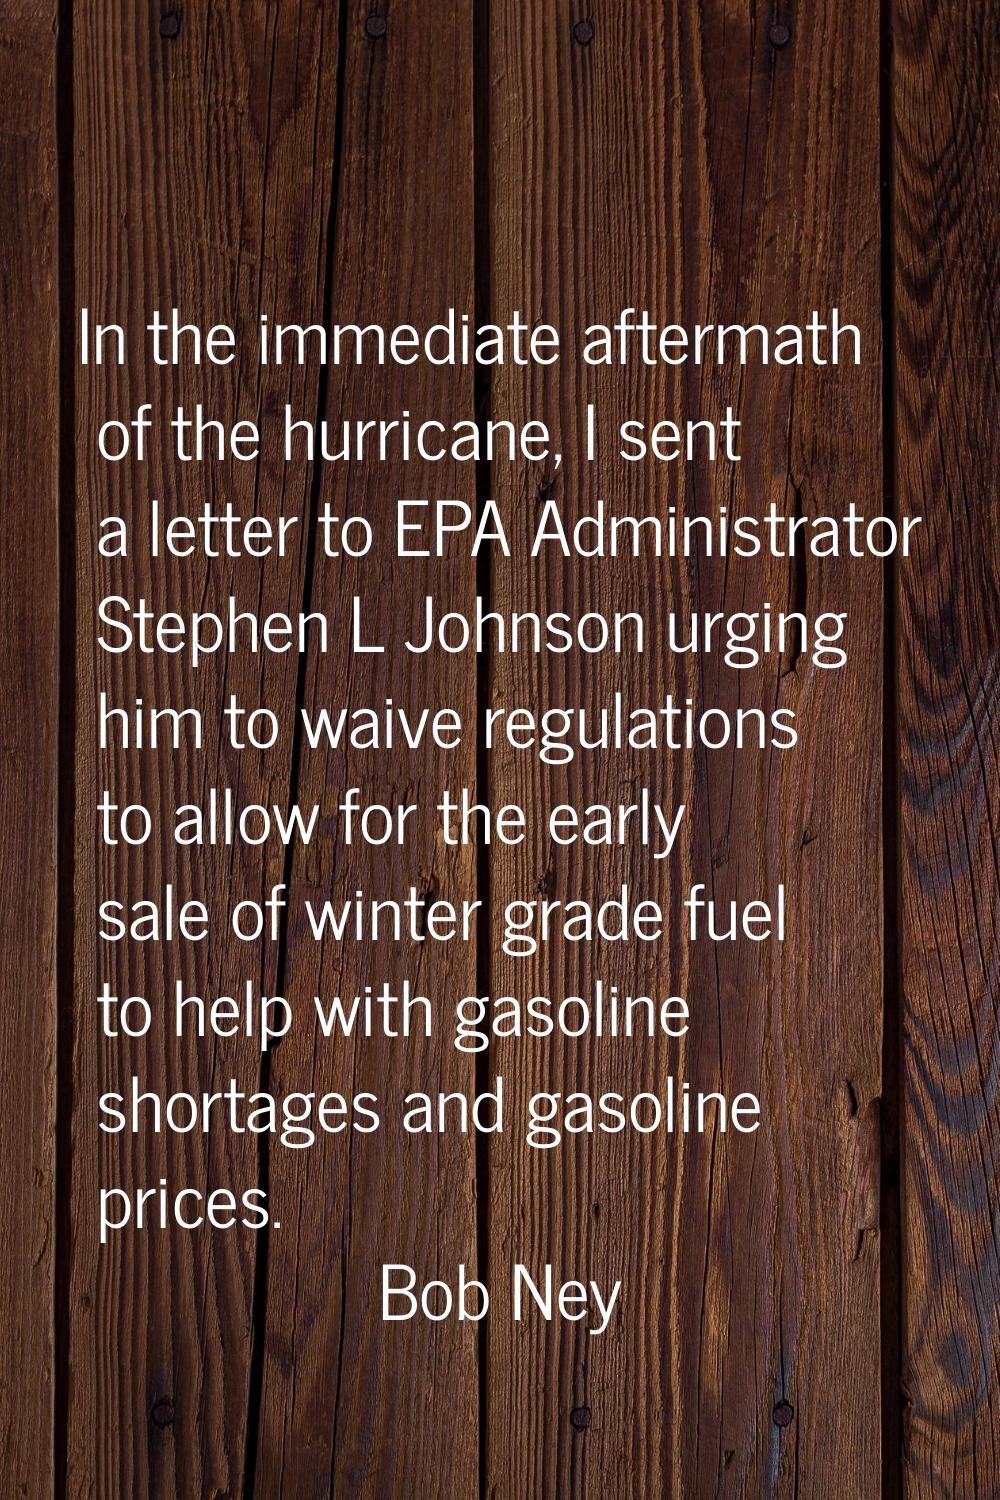 In the immediate aftermath of the hurricane, I sent a letter to EPA Administrator Stephen L Johnson